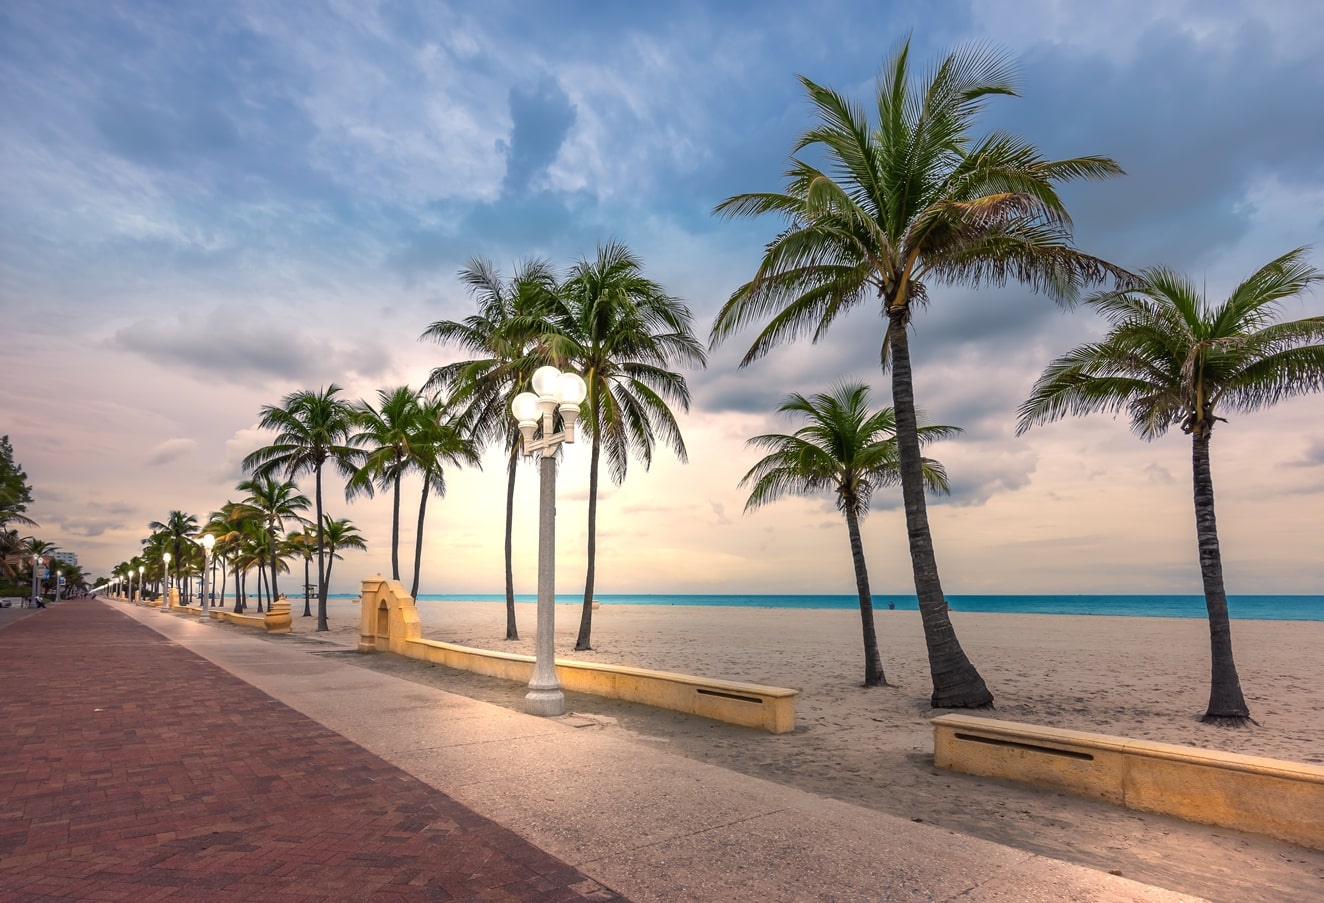 Hollywood, Florida - Palm trees and boardwalk